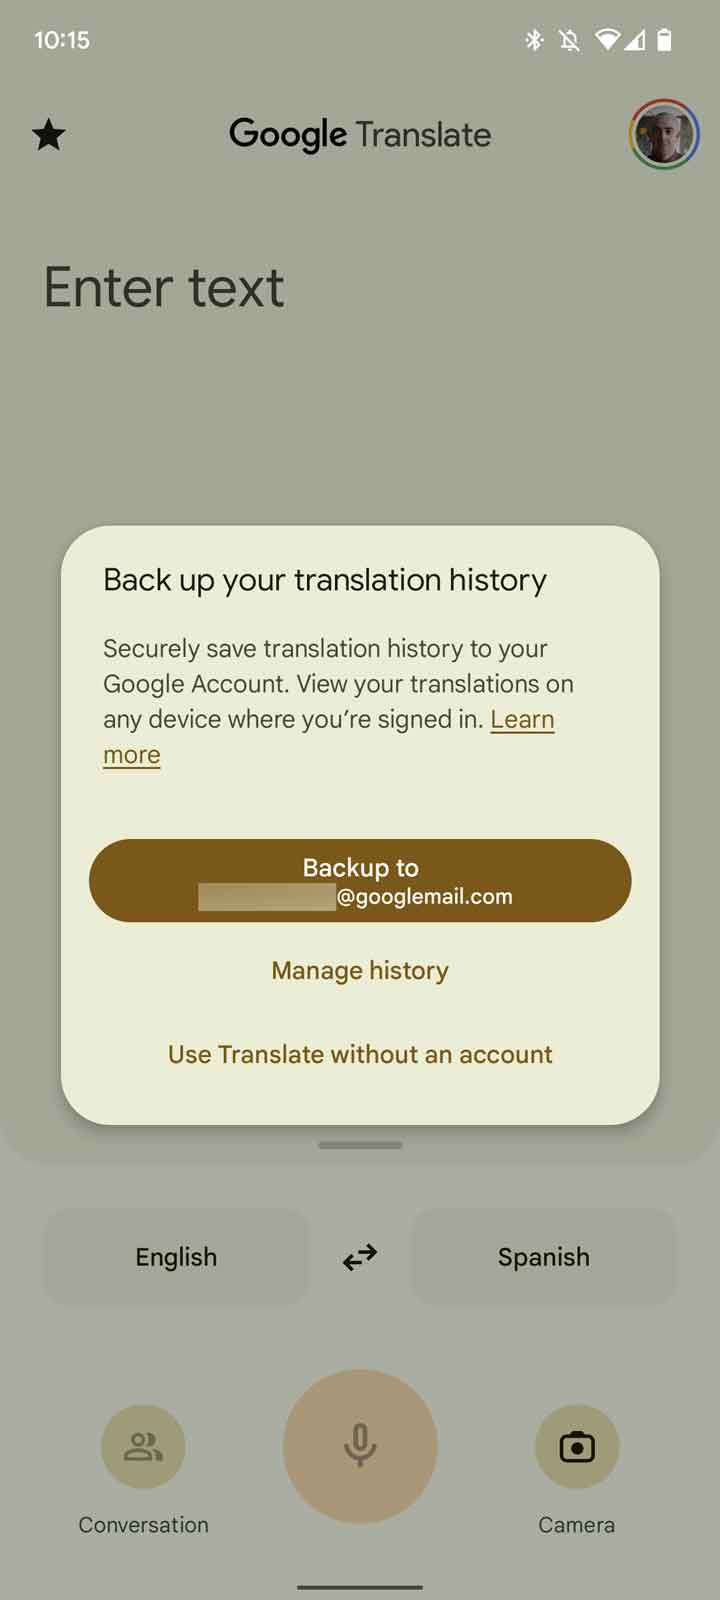 Google Translate Search history prompt